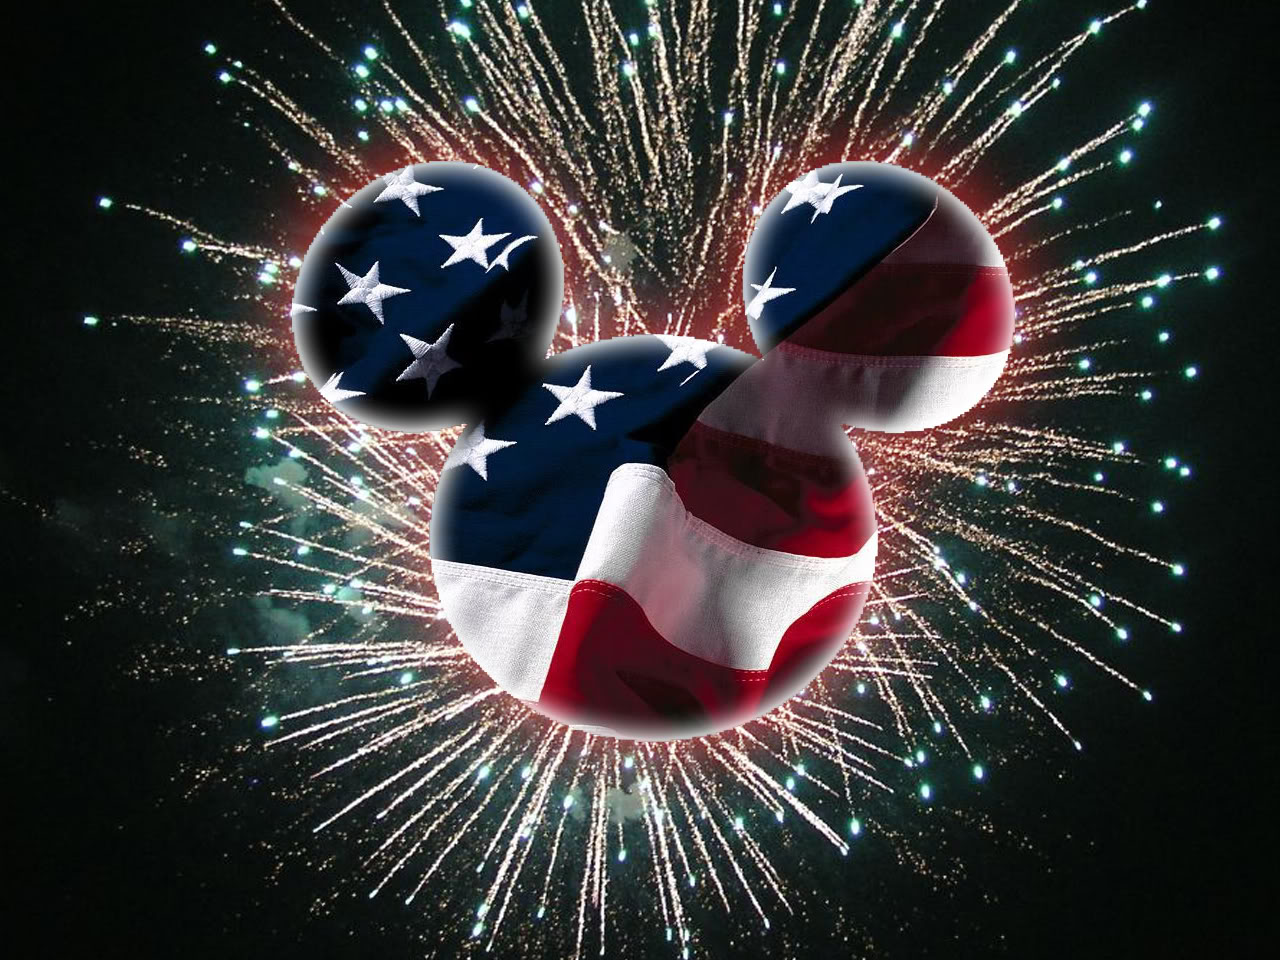 iPhone 4th Of July Wallpapers  Wallpaper Cave